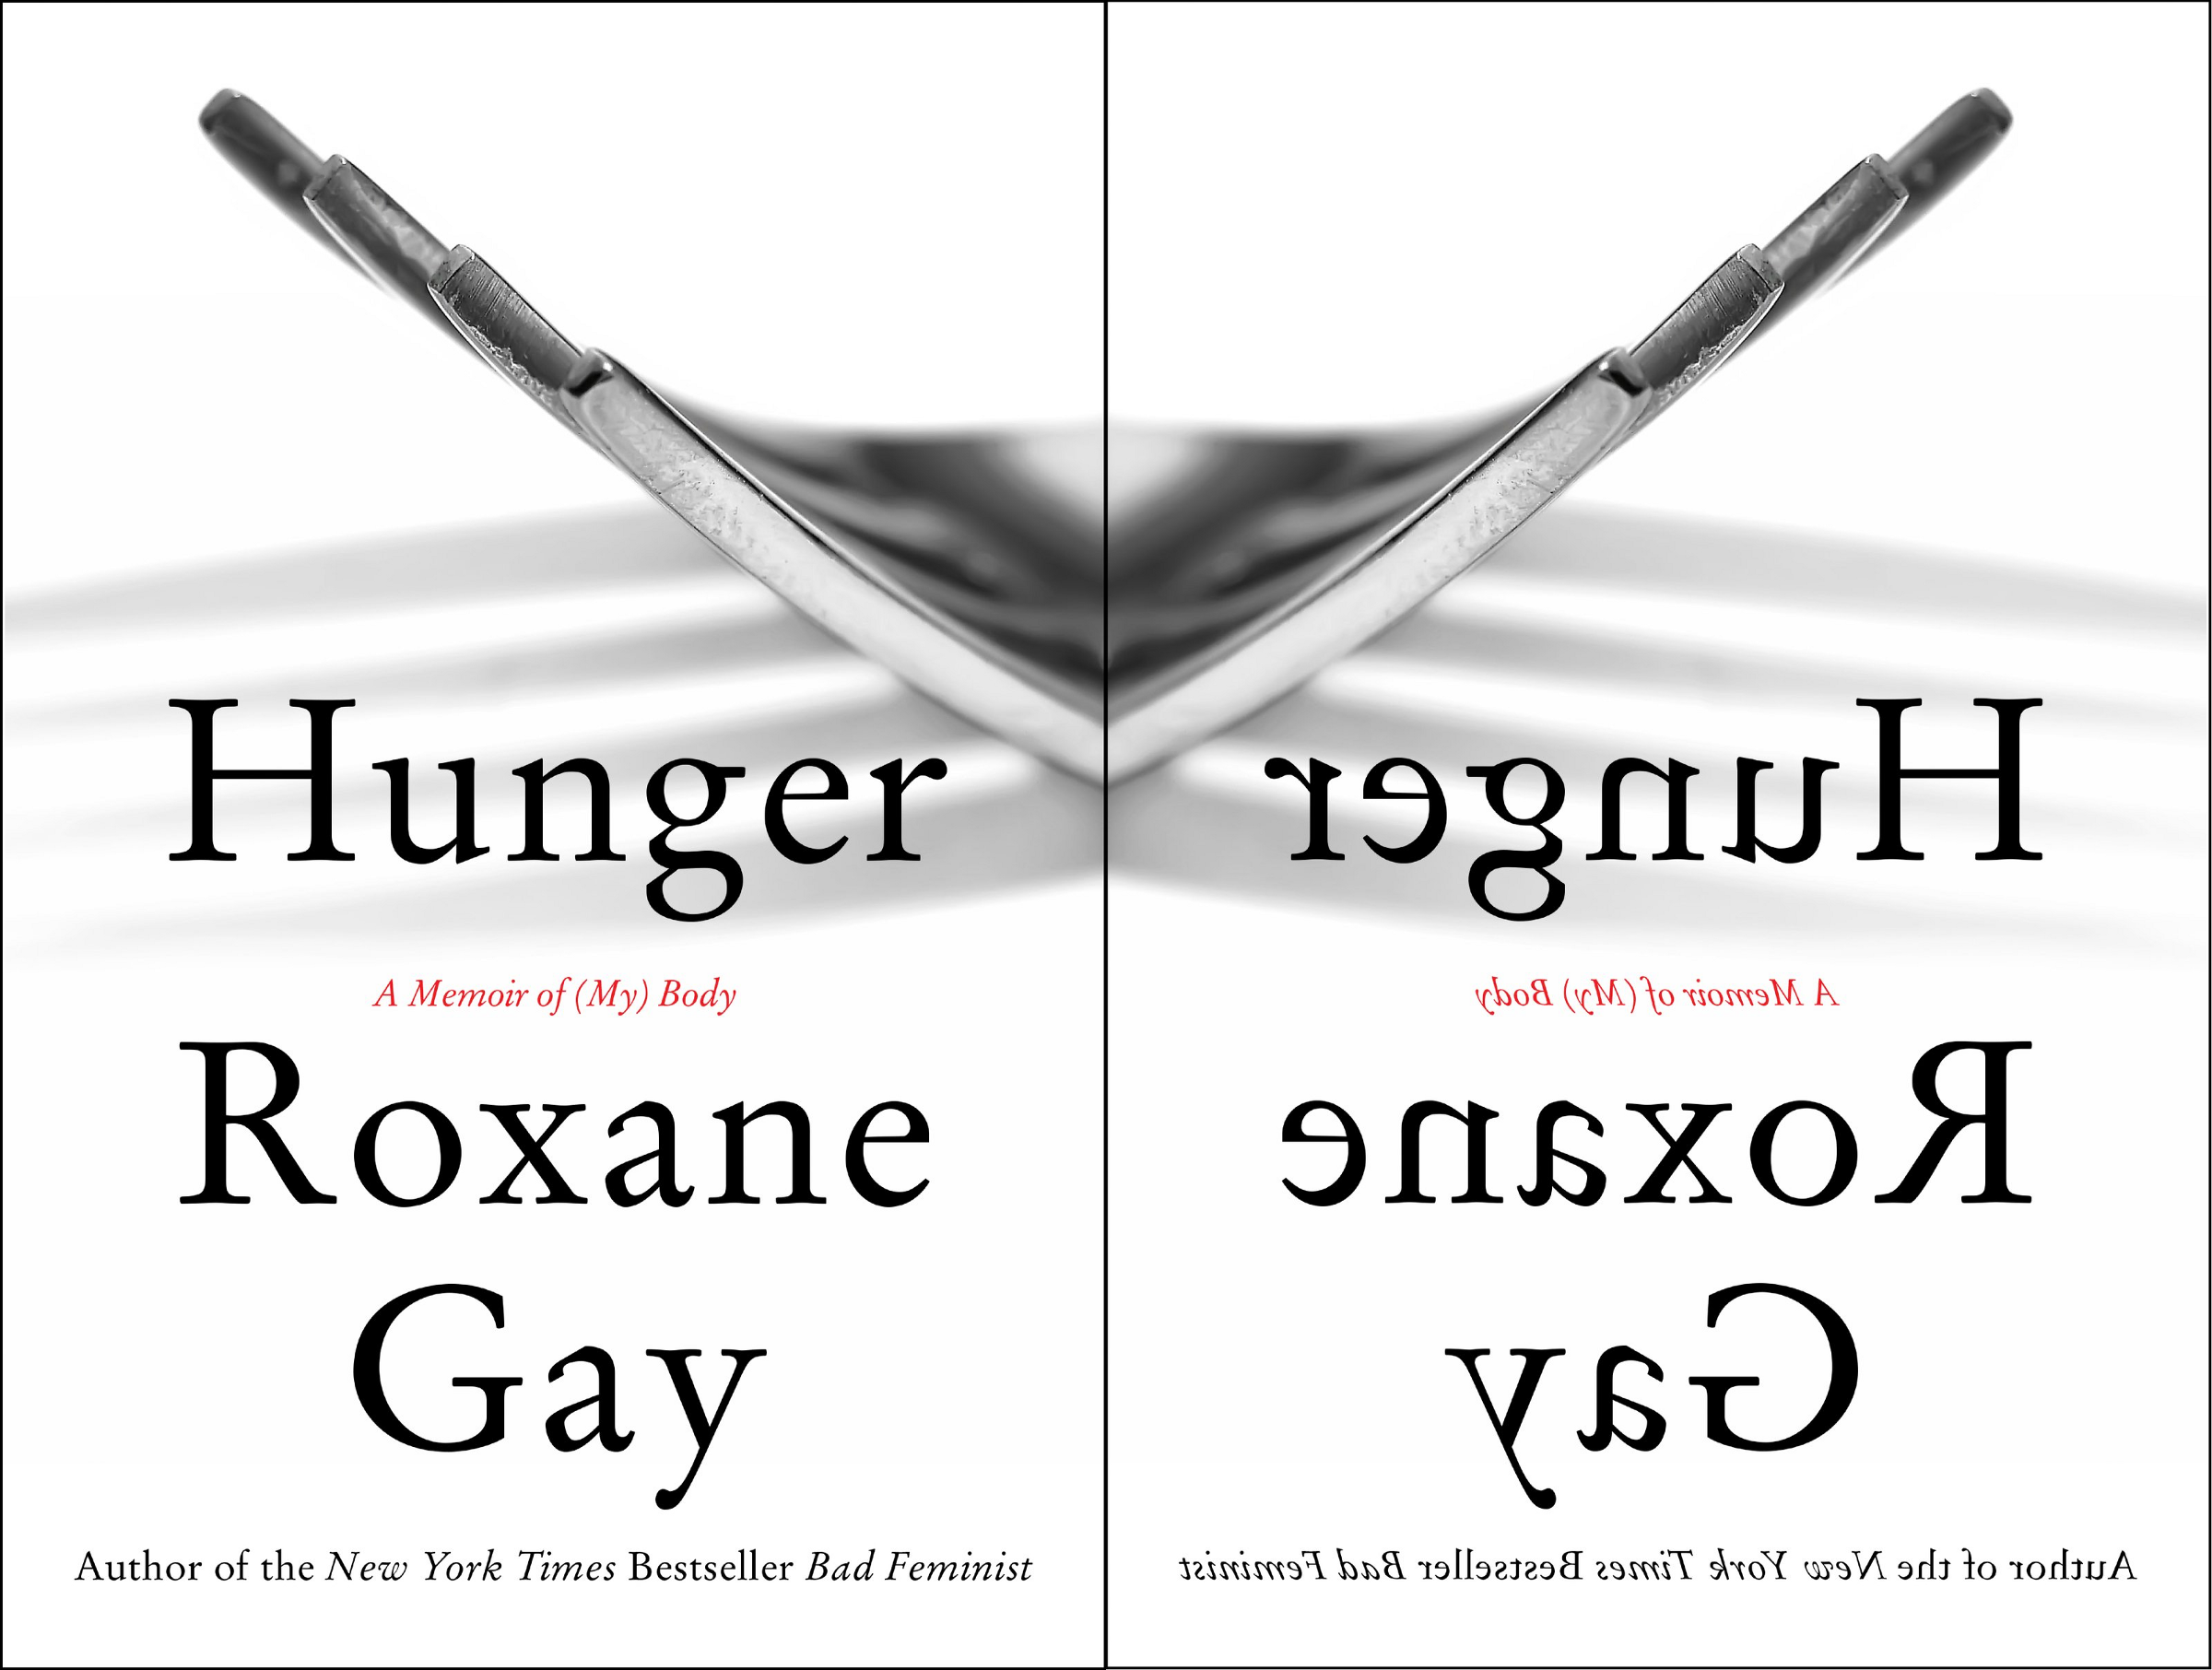 hunger roxane gay sparknotes